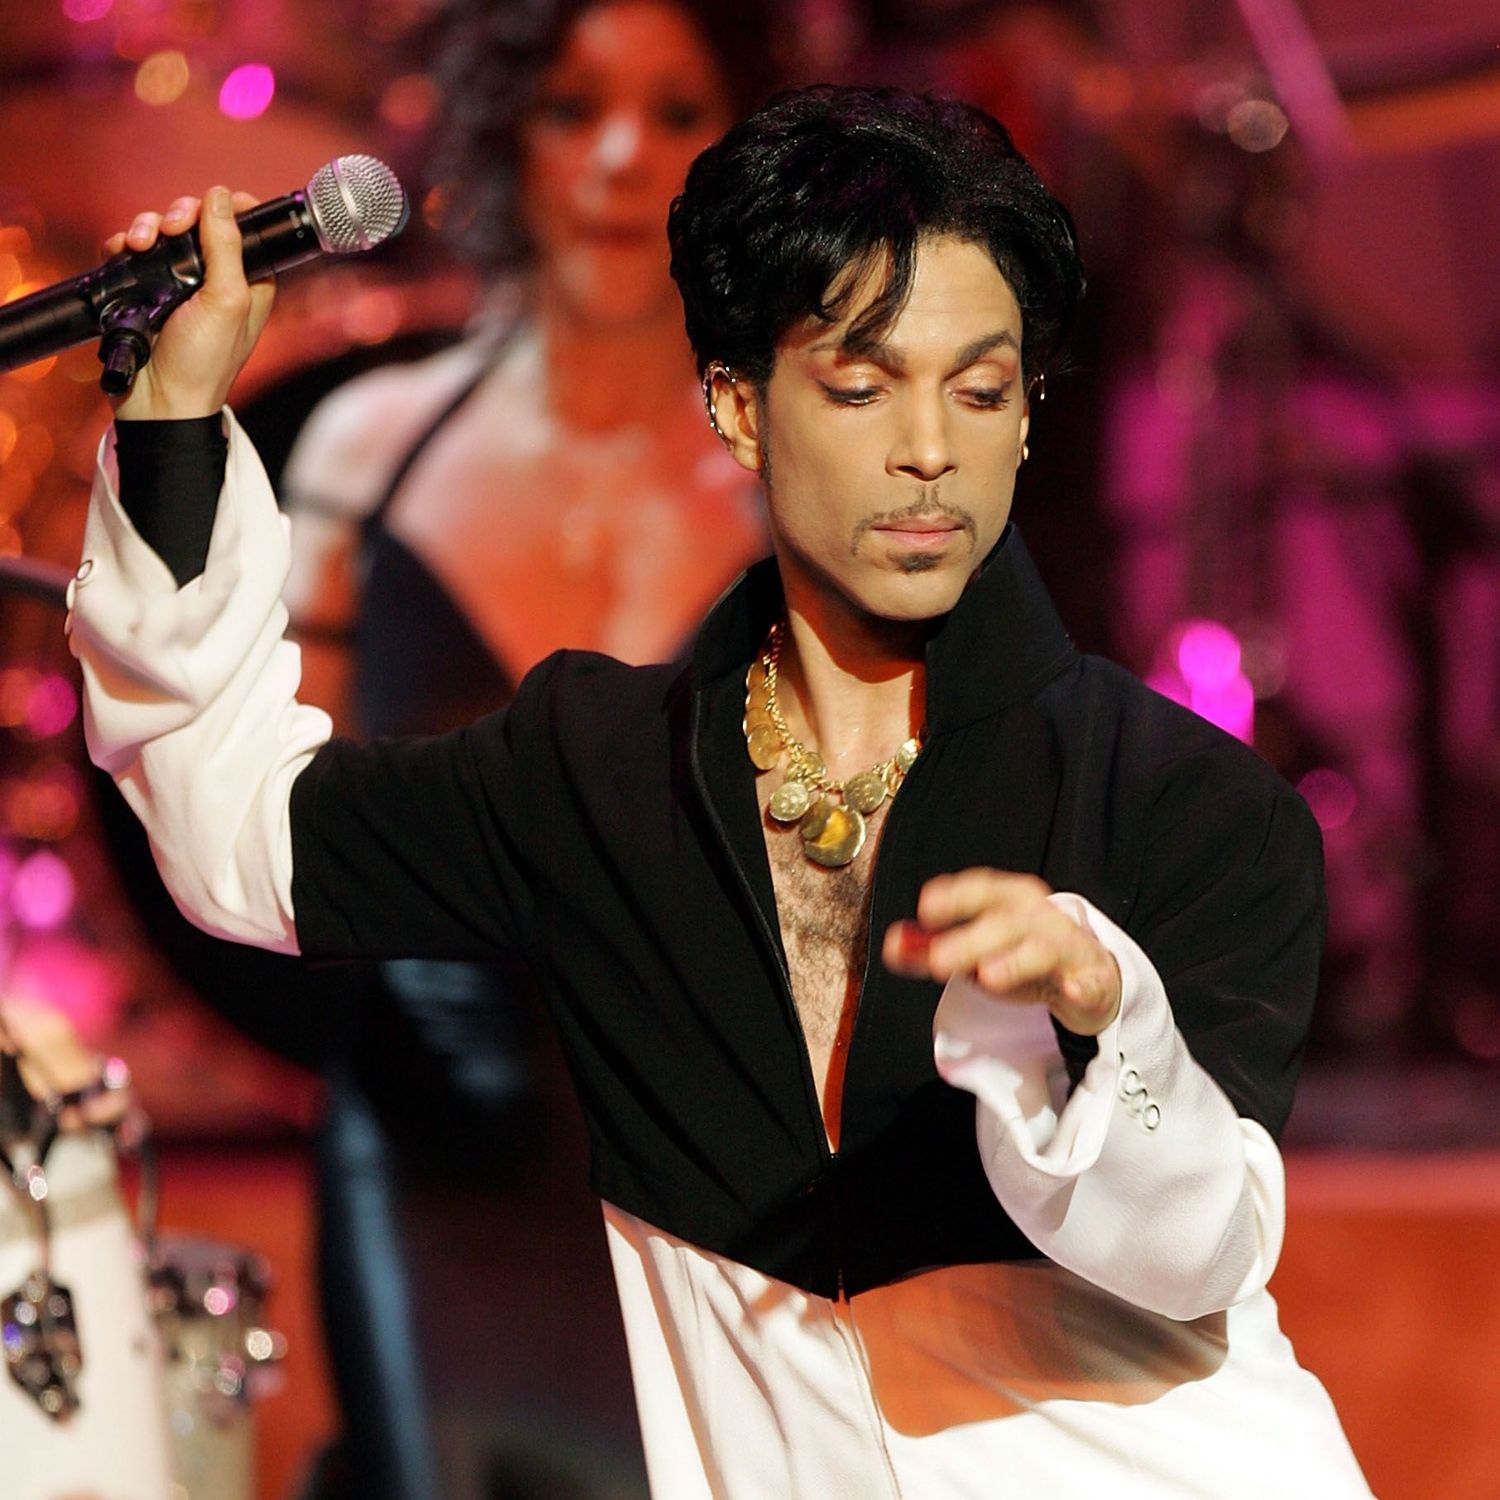 Prince at the 36th Annual NAACP Image Awards